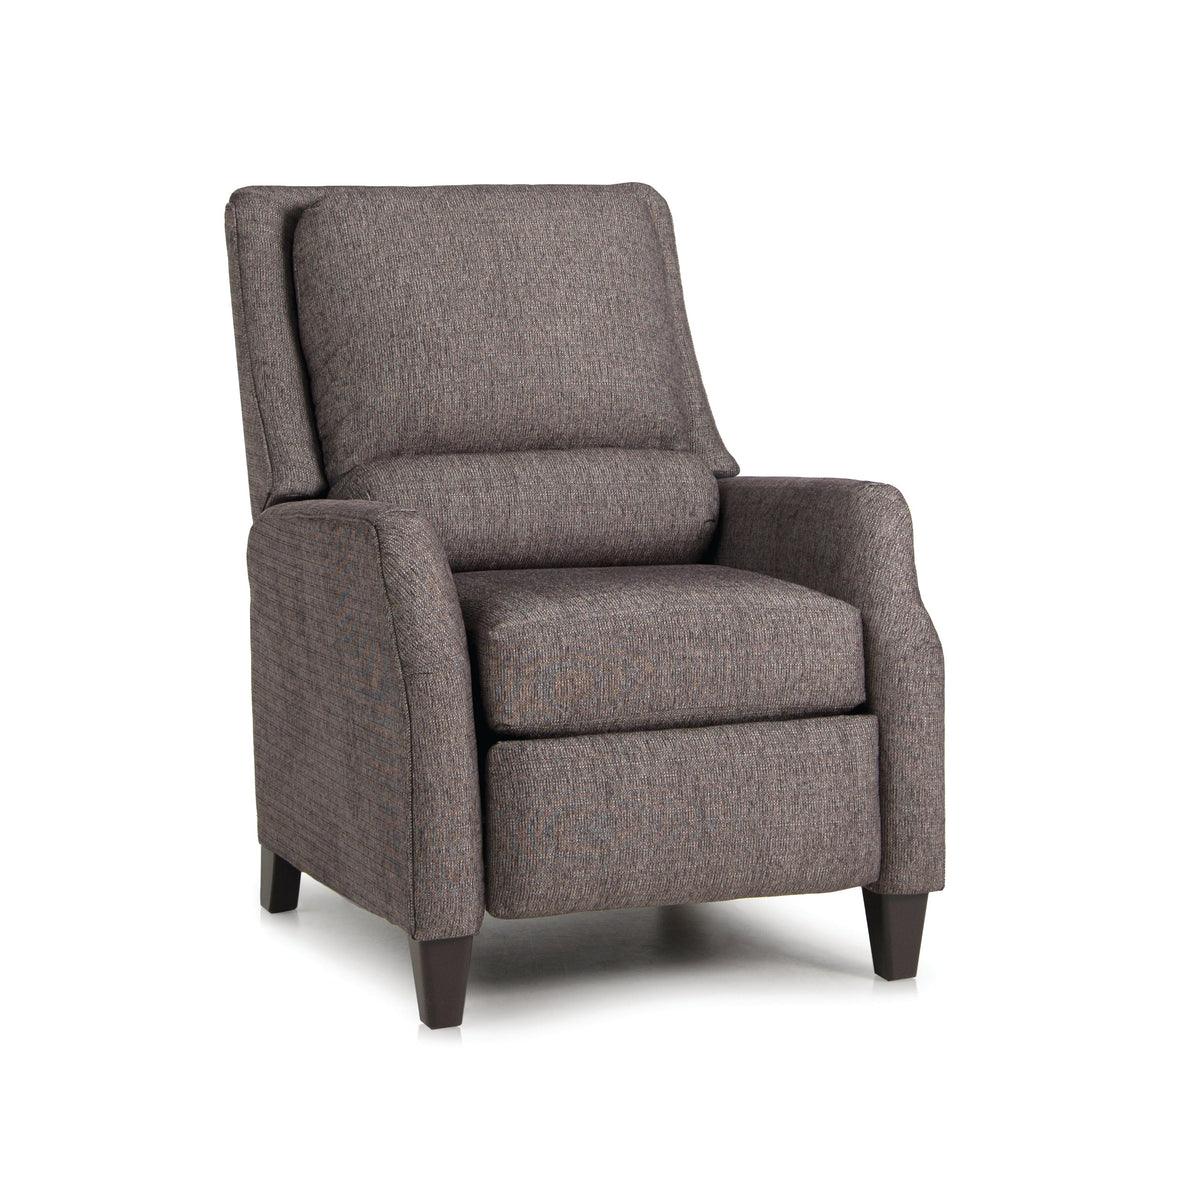 722 Style Pressback Reclining Chair